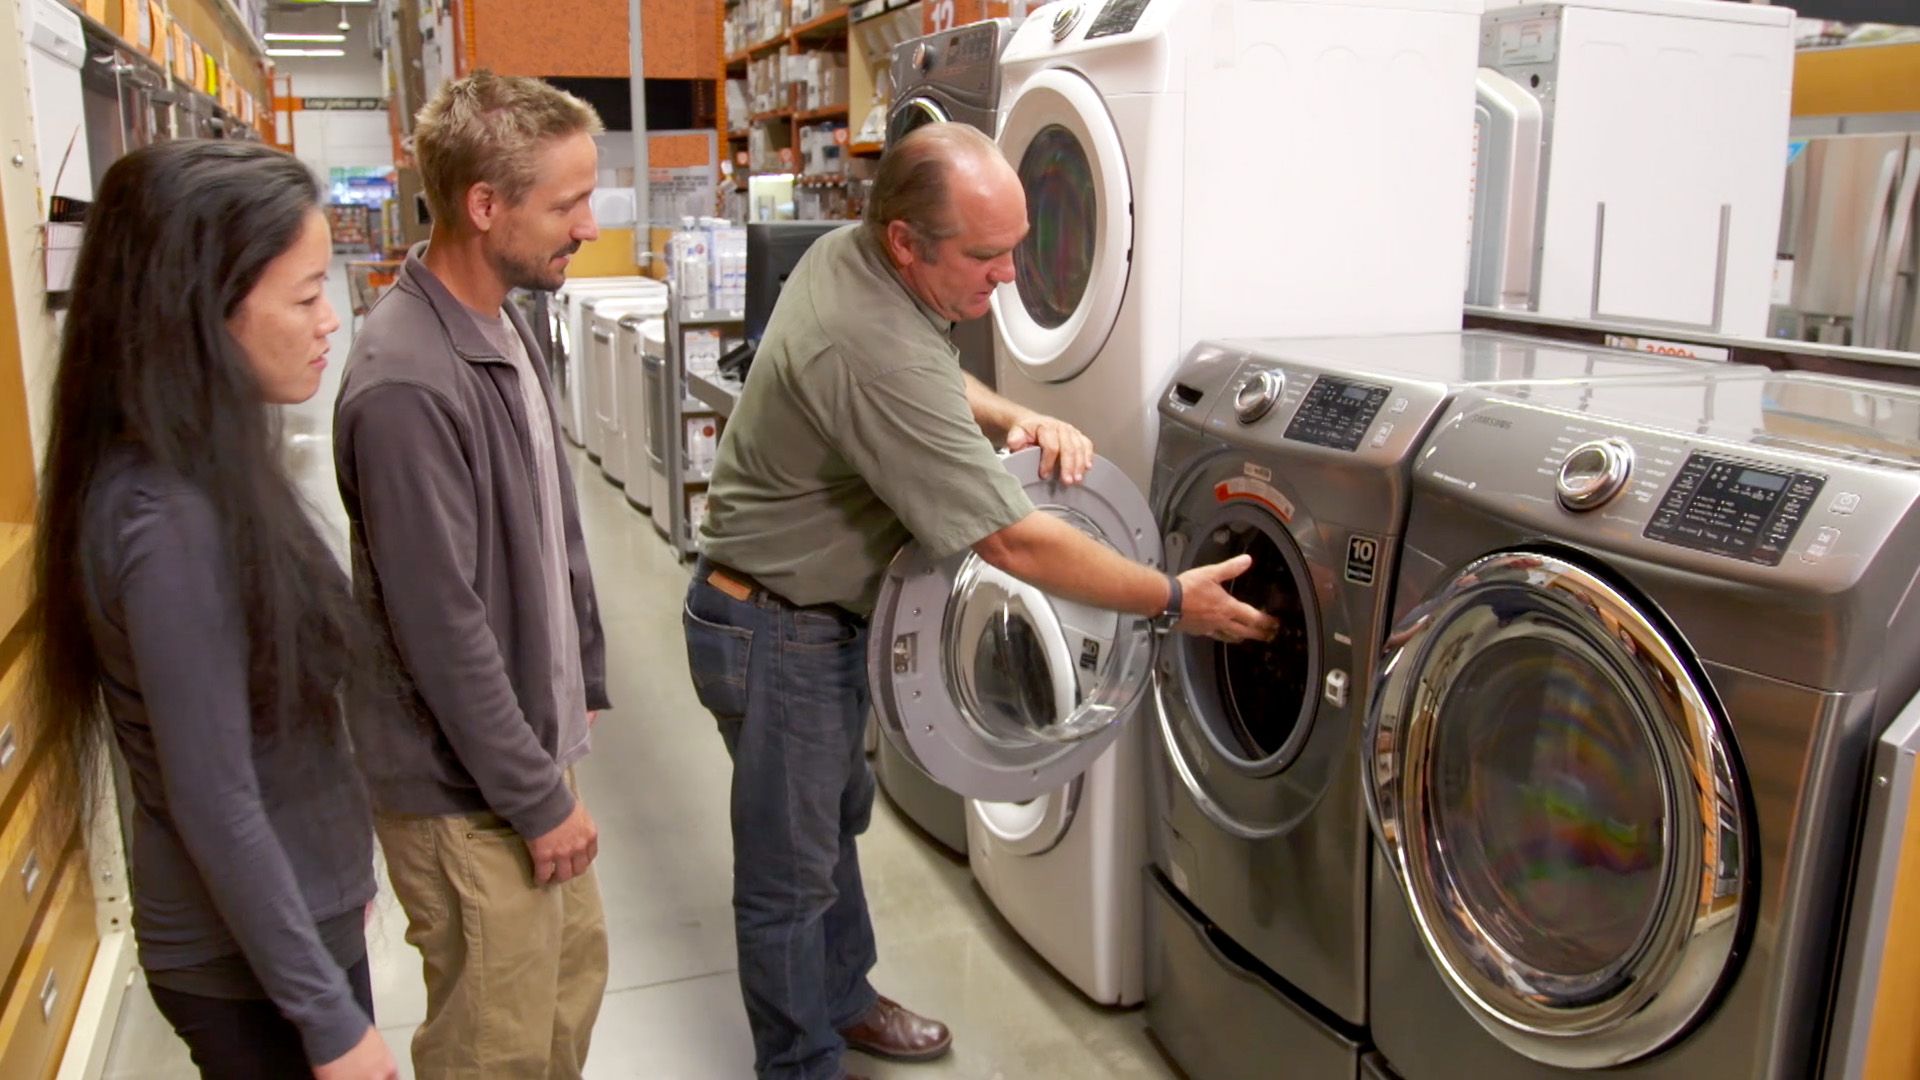 Read This Before You Redo Your Laundry Room - This Old House